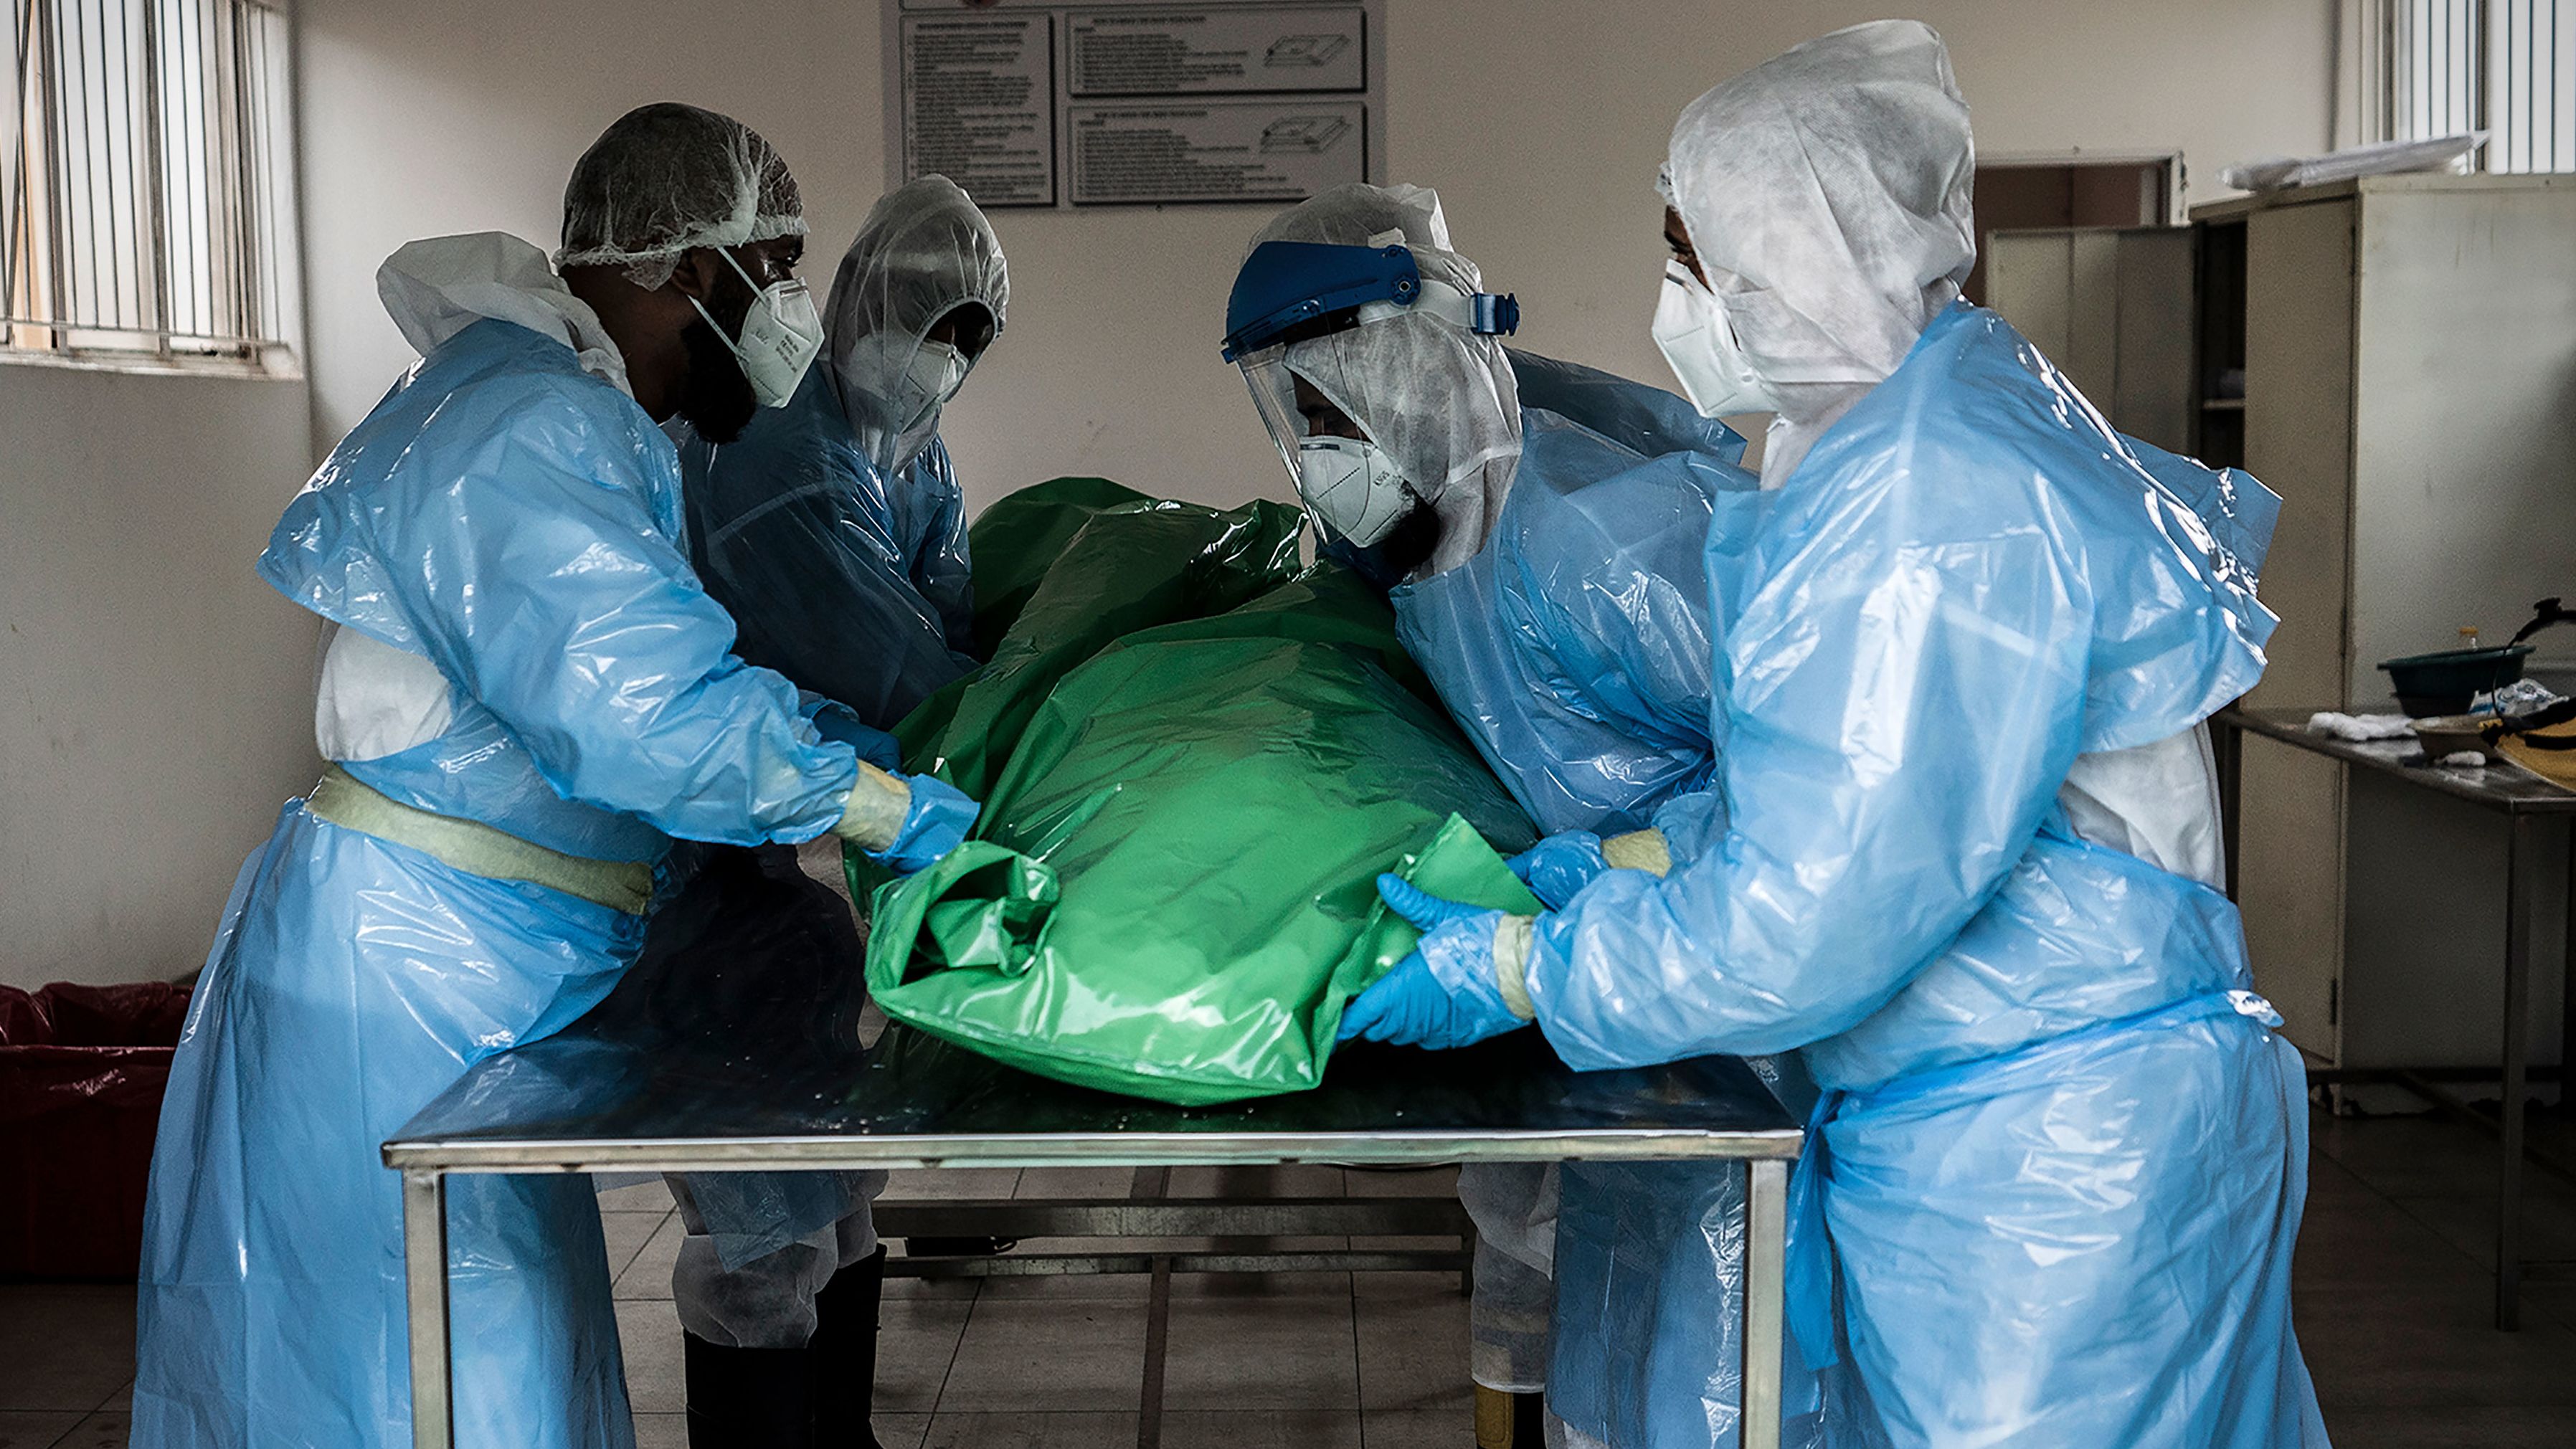 Members of the Saaberie Chishty Burial Society prepare the body of a person who died from COVID-19 at a Johannesburg cemetary Saturday Dec. 26, 2020. South Africa's health minister has announced an "alarming rate of spread" in the country. 